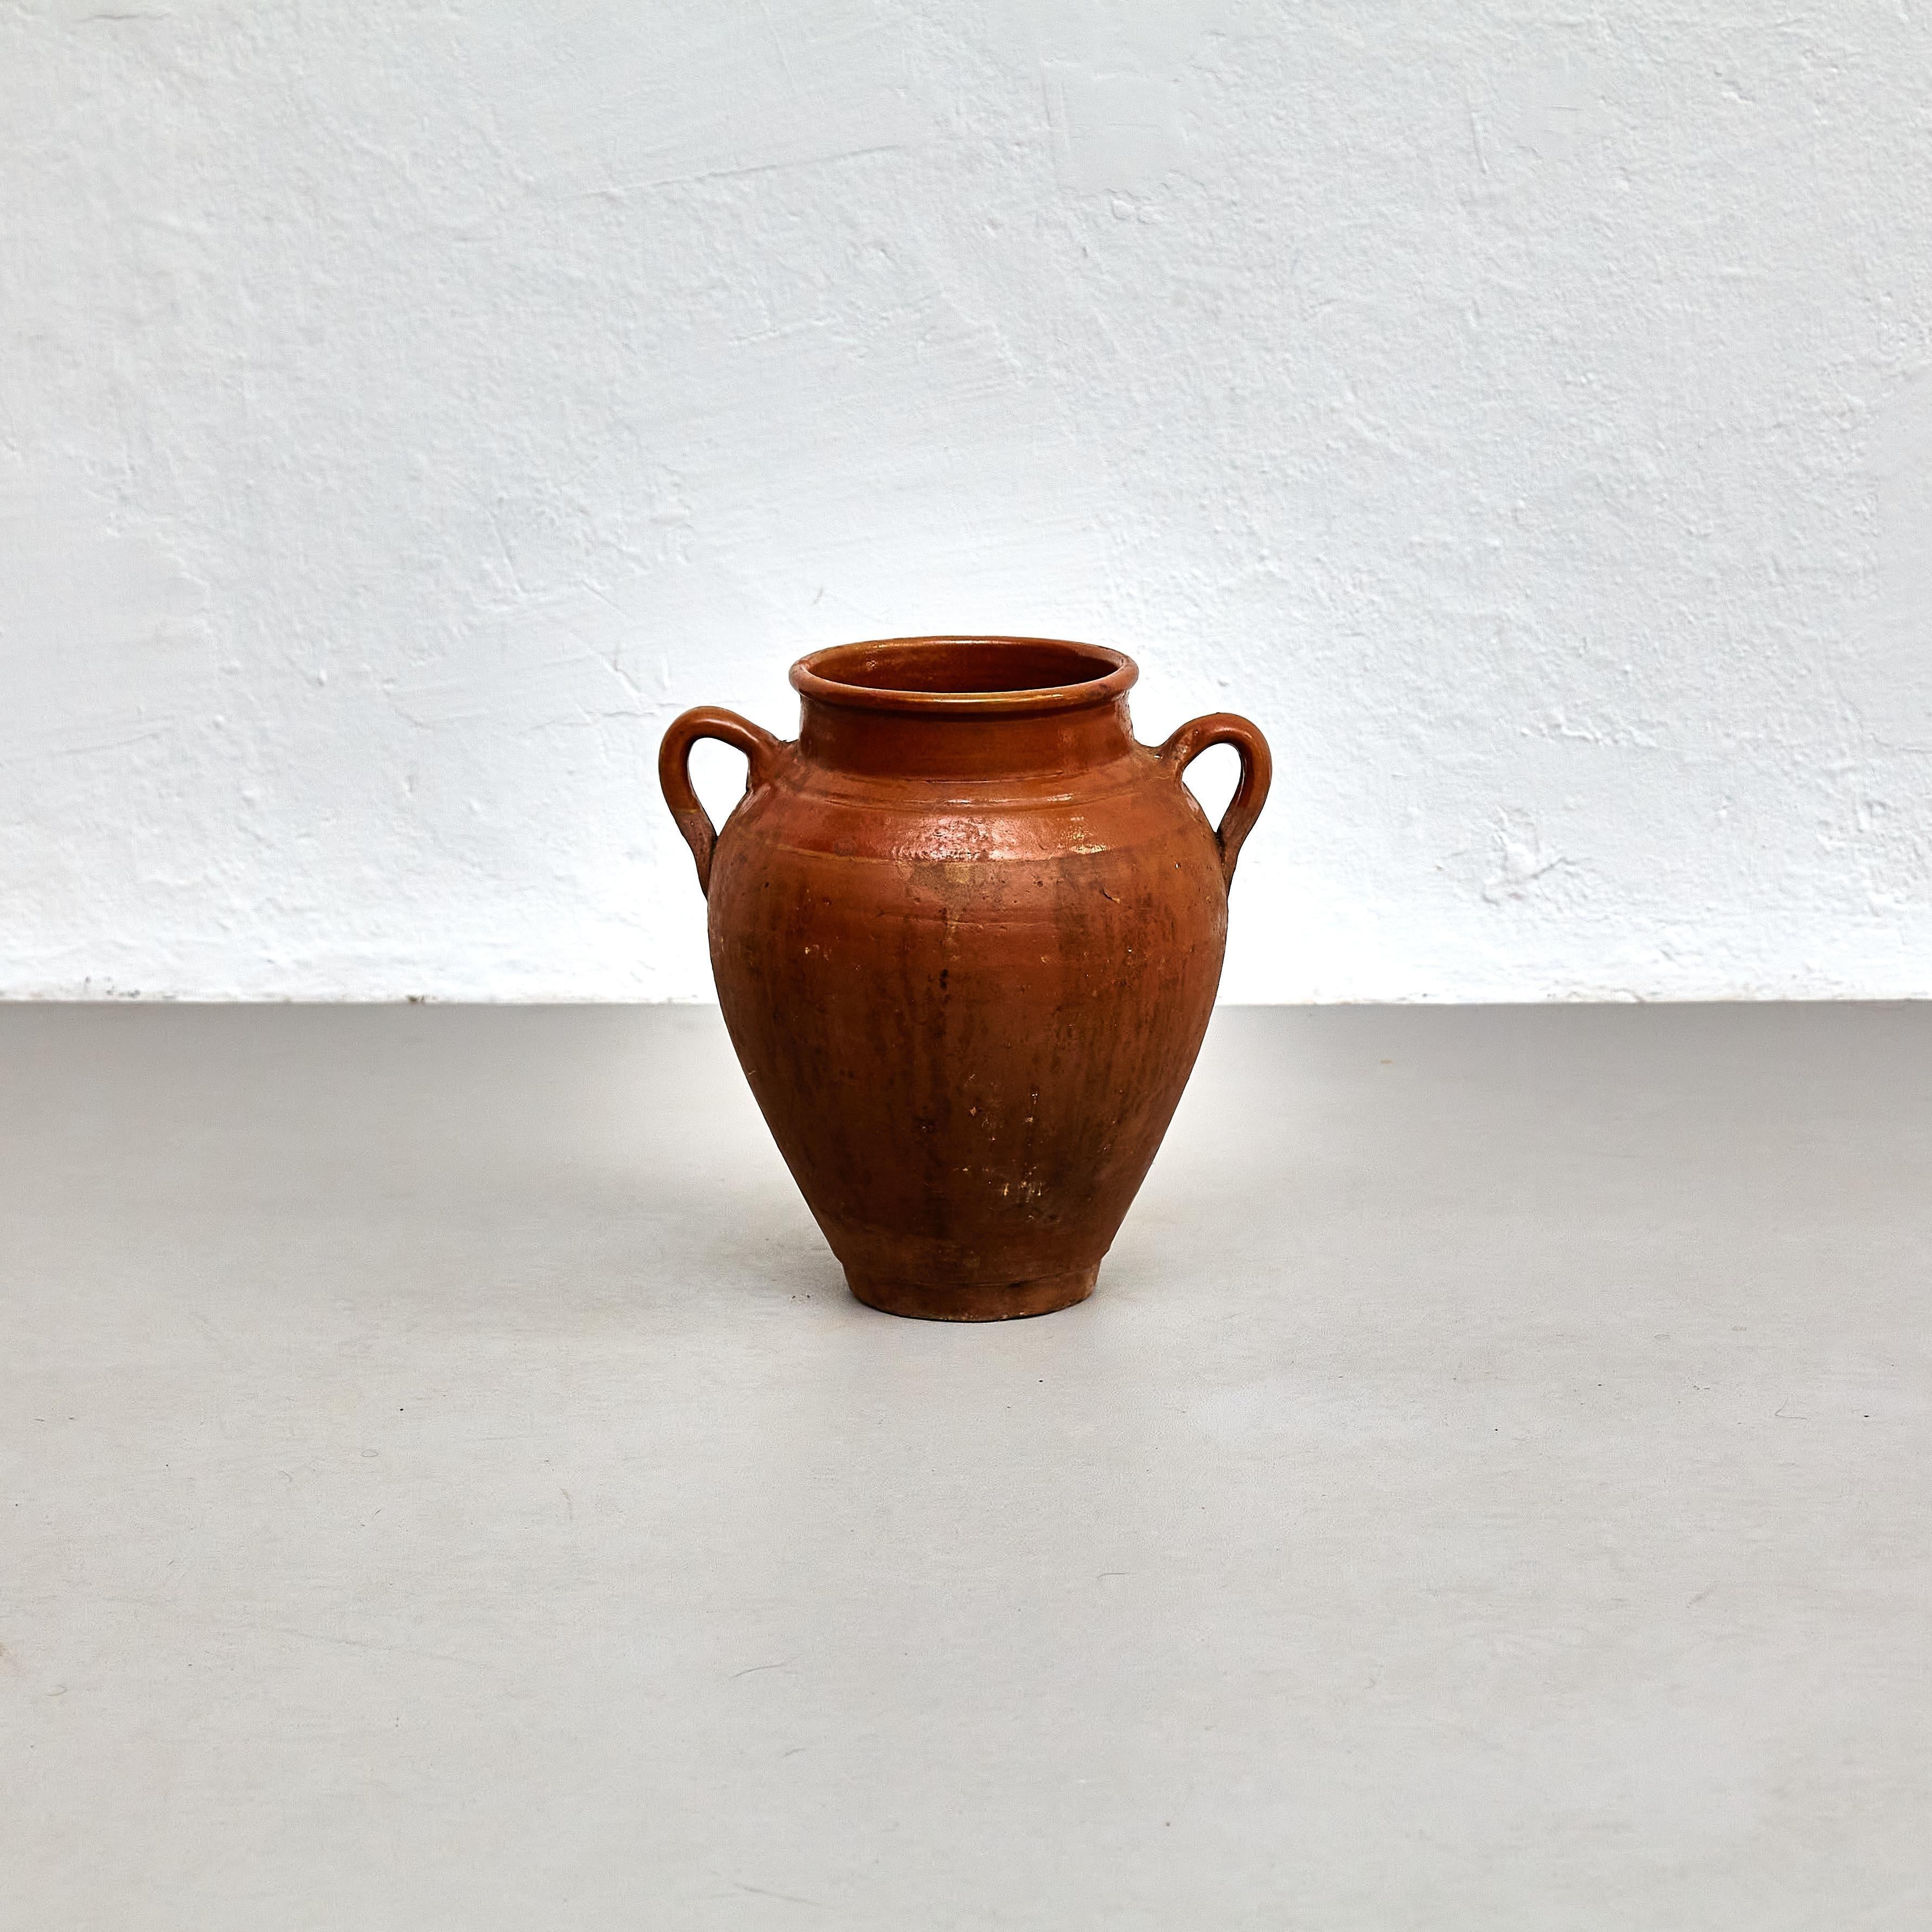 Early 20th century traditional Spanish ceramic vase.

Manufactured in Spain, early 20th century.

In original condition with minor wear consistent of age and use, preserving a beautiful patina.

Materials: 
Ceramic

Dimensions: 
Diam 25 cm x H 31